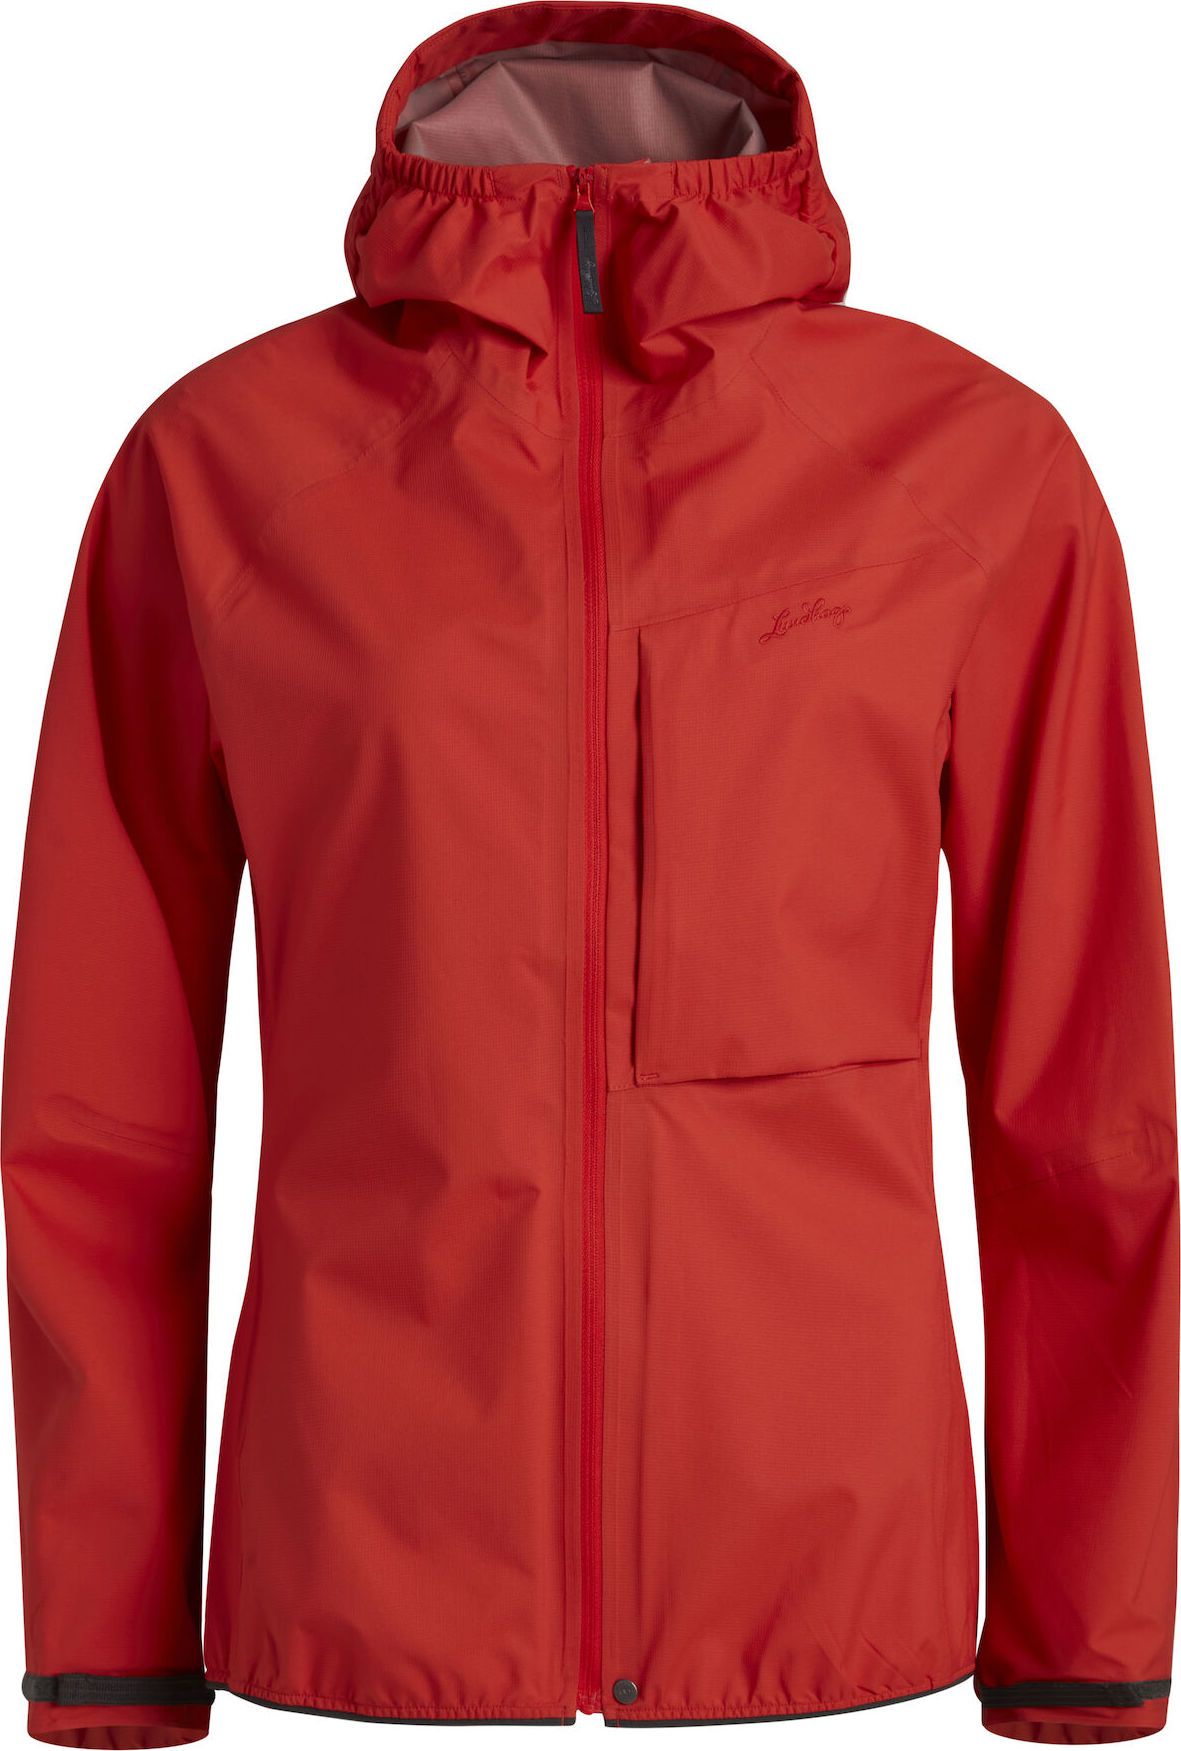 Lundhags Women's Lo Jacket Lively Red